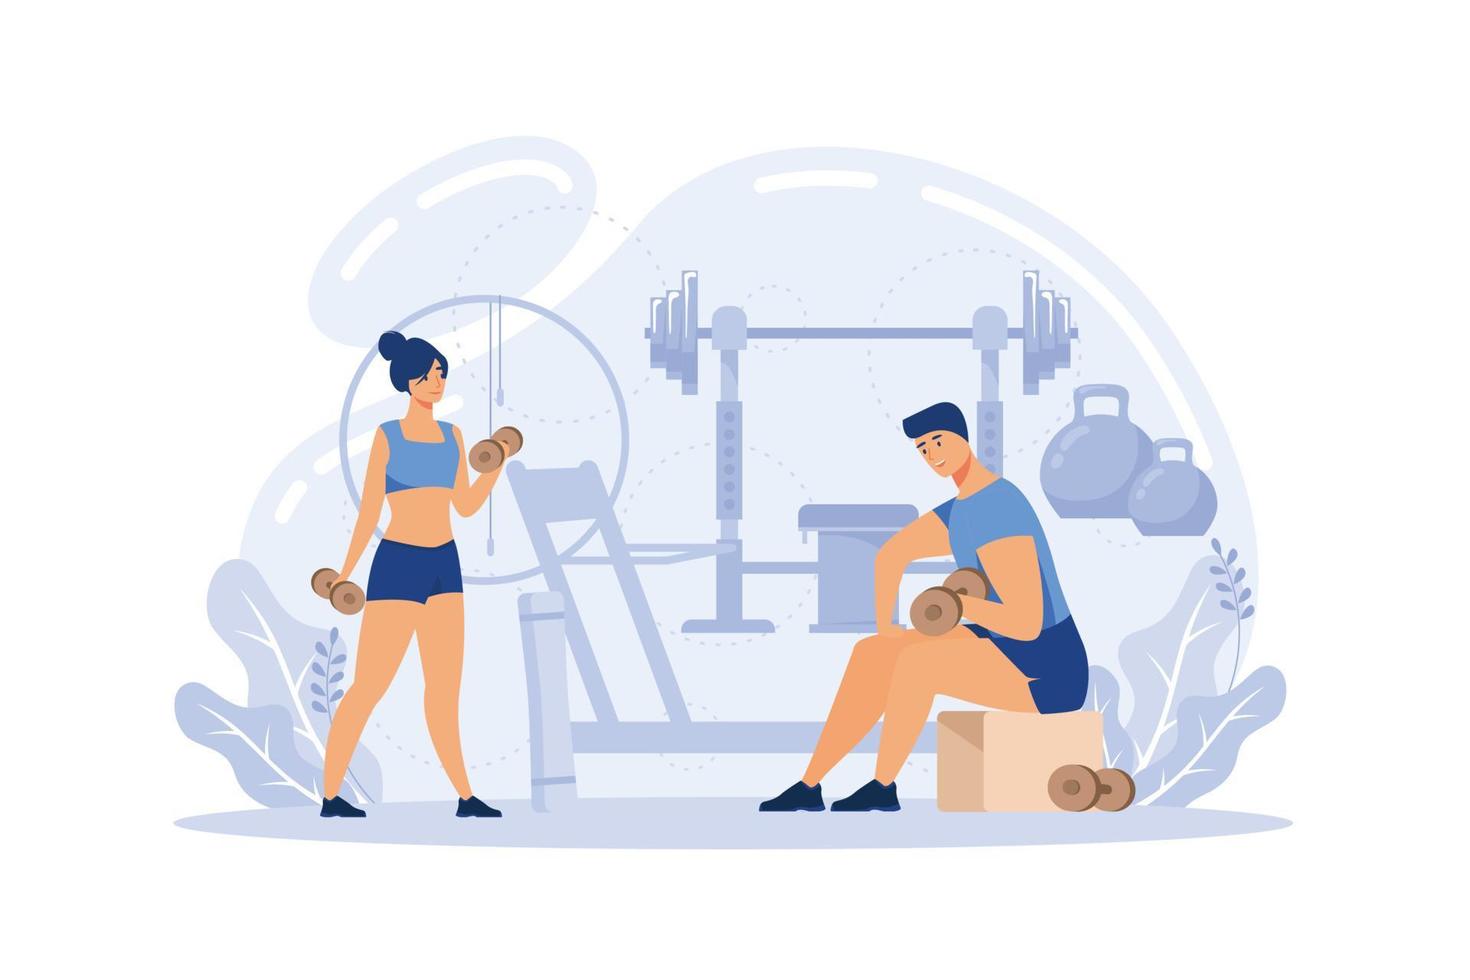 Fitness trainer concept. Workout in the gym with professional athlete. Healthy and active lifestyle. Training and nutrition plan. vector